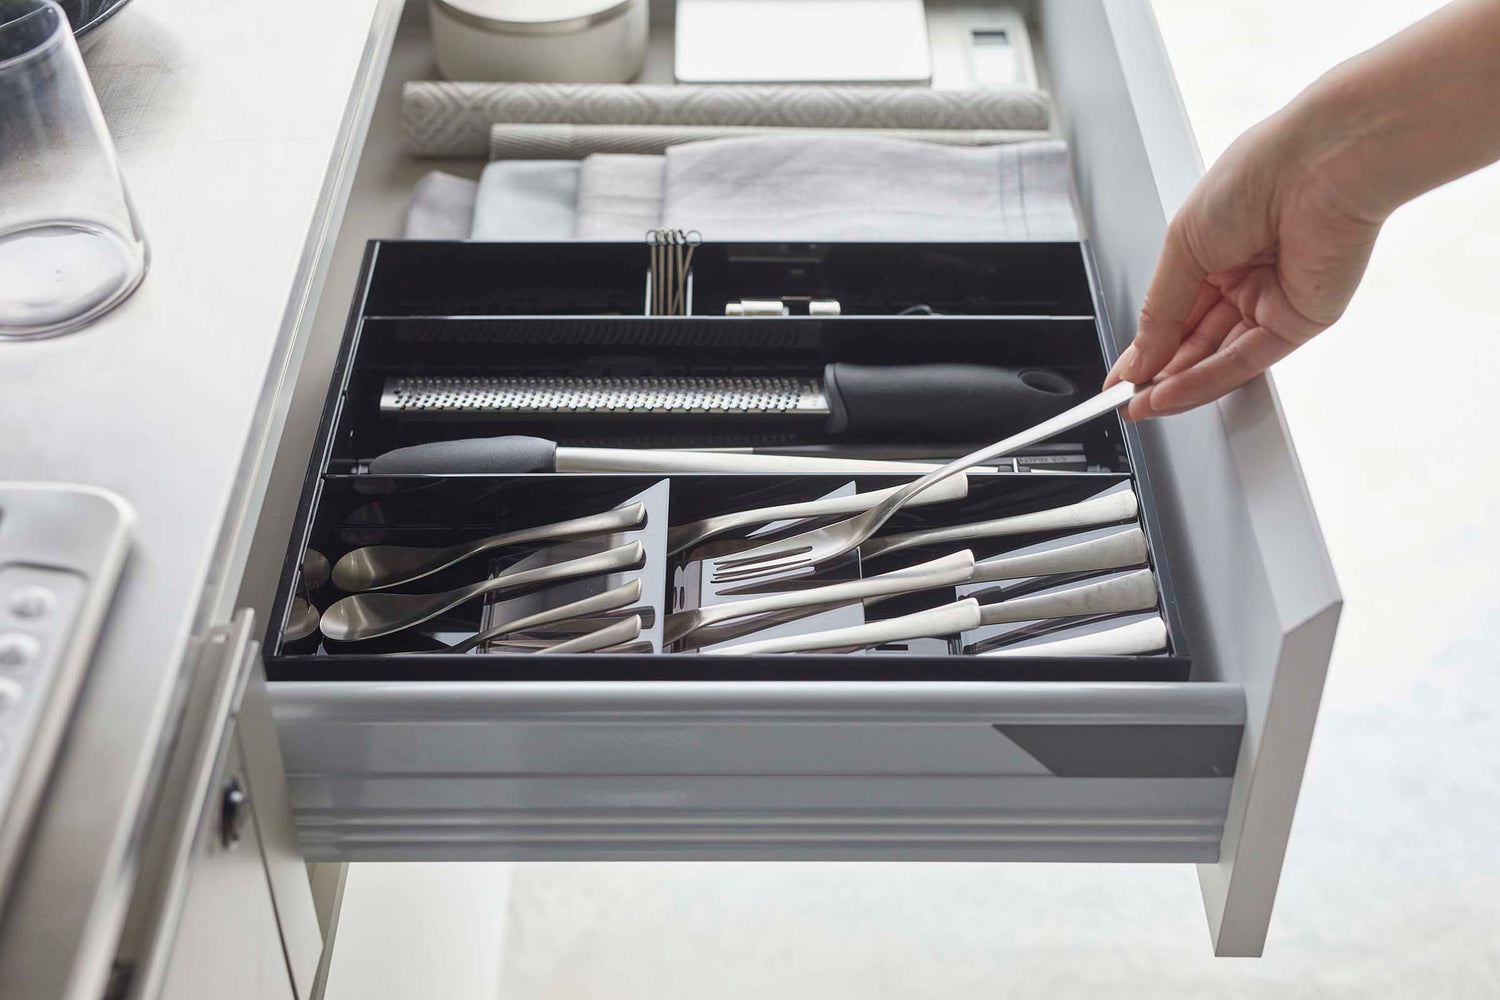 View 26 - Side view of person grabbing fork out of black Expandable Cutlery Storage Organizer by Yamazaki Home.